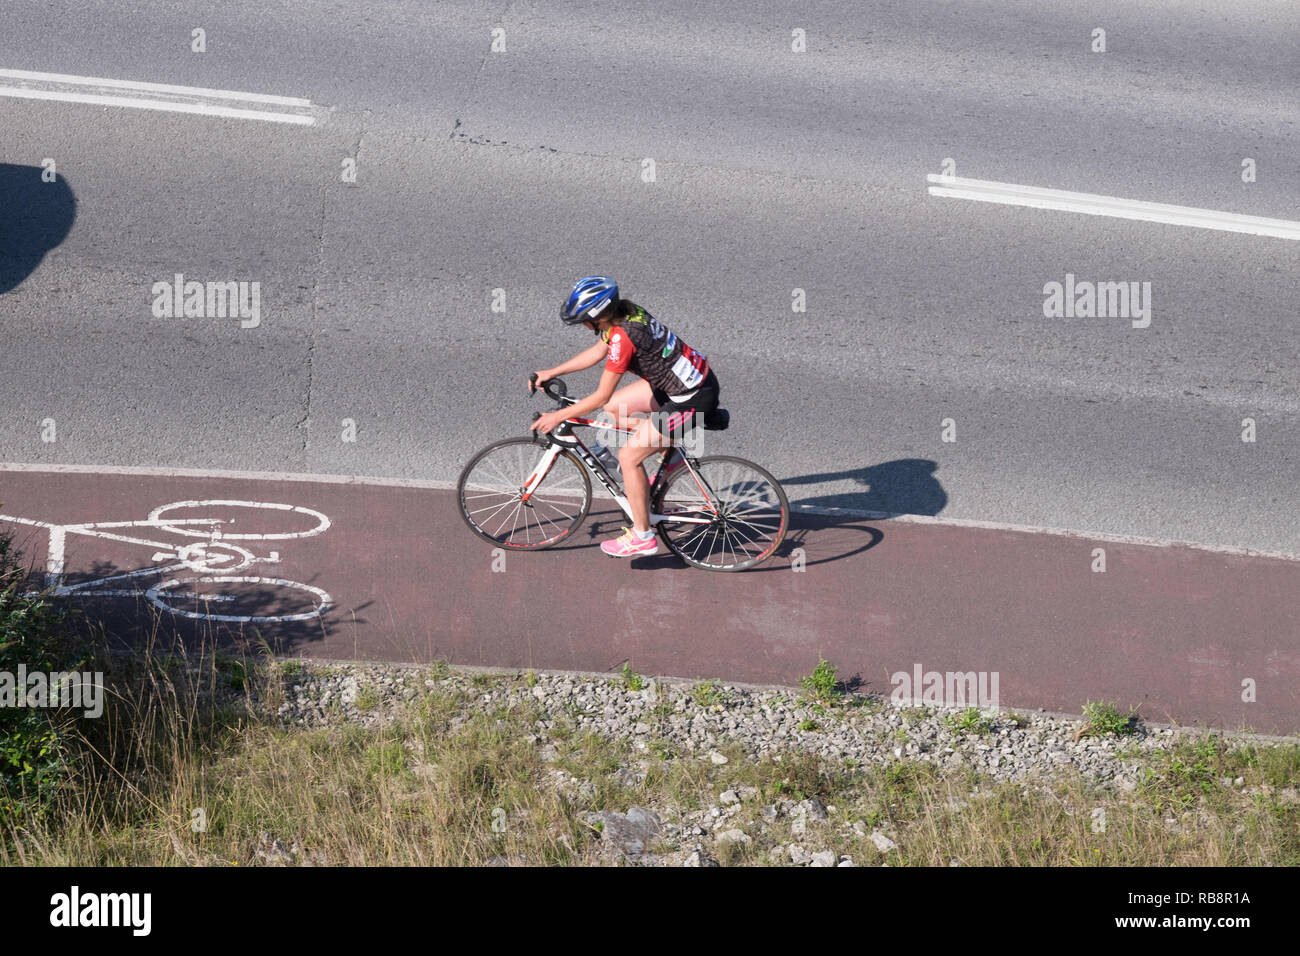 Cyclist in cycle lane shot from above Stock Photo